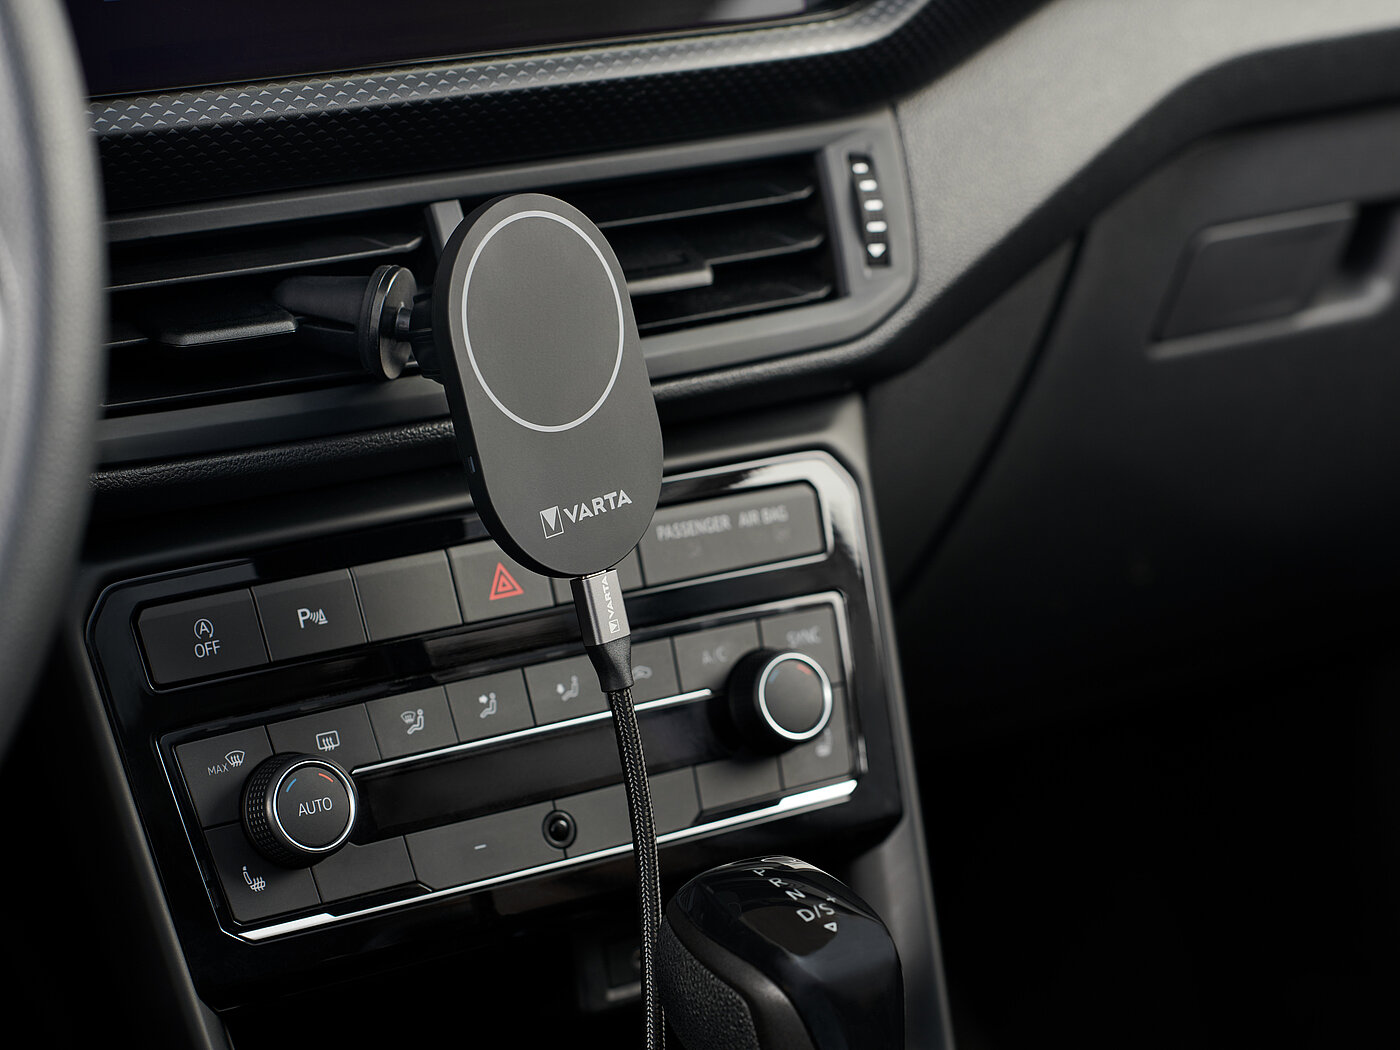 Magnetically attracting: The new Mag Pro Wireless Car Charger from